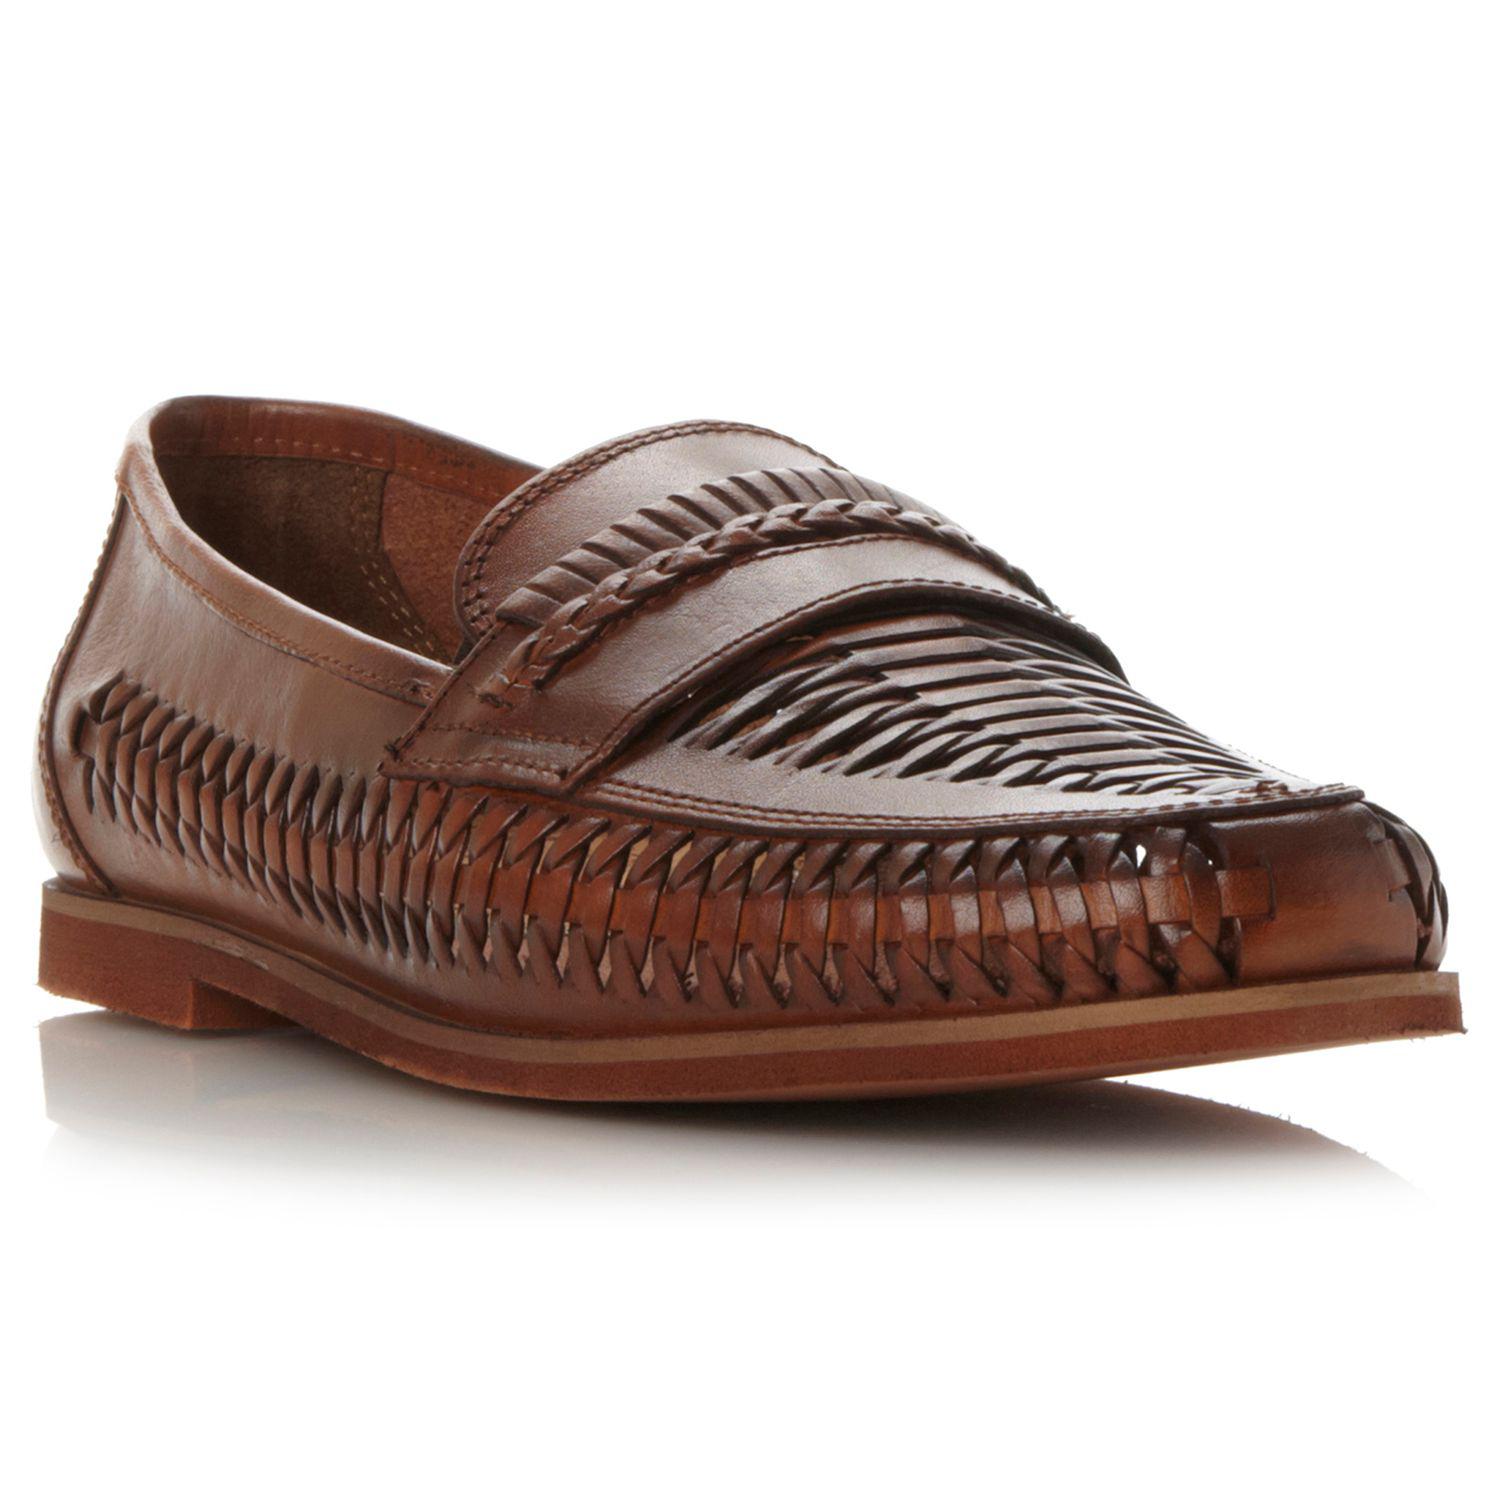 Dune Brighton Rock Woven Leather Loafers in Tan (Brown) for Men - Lyst